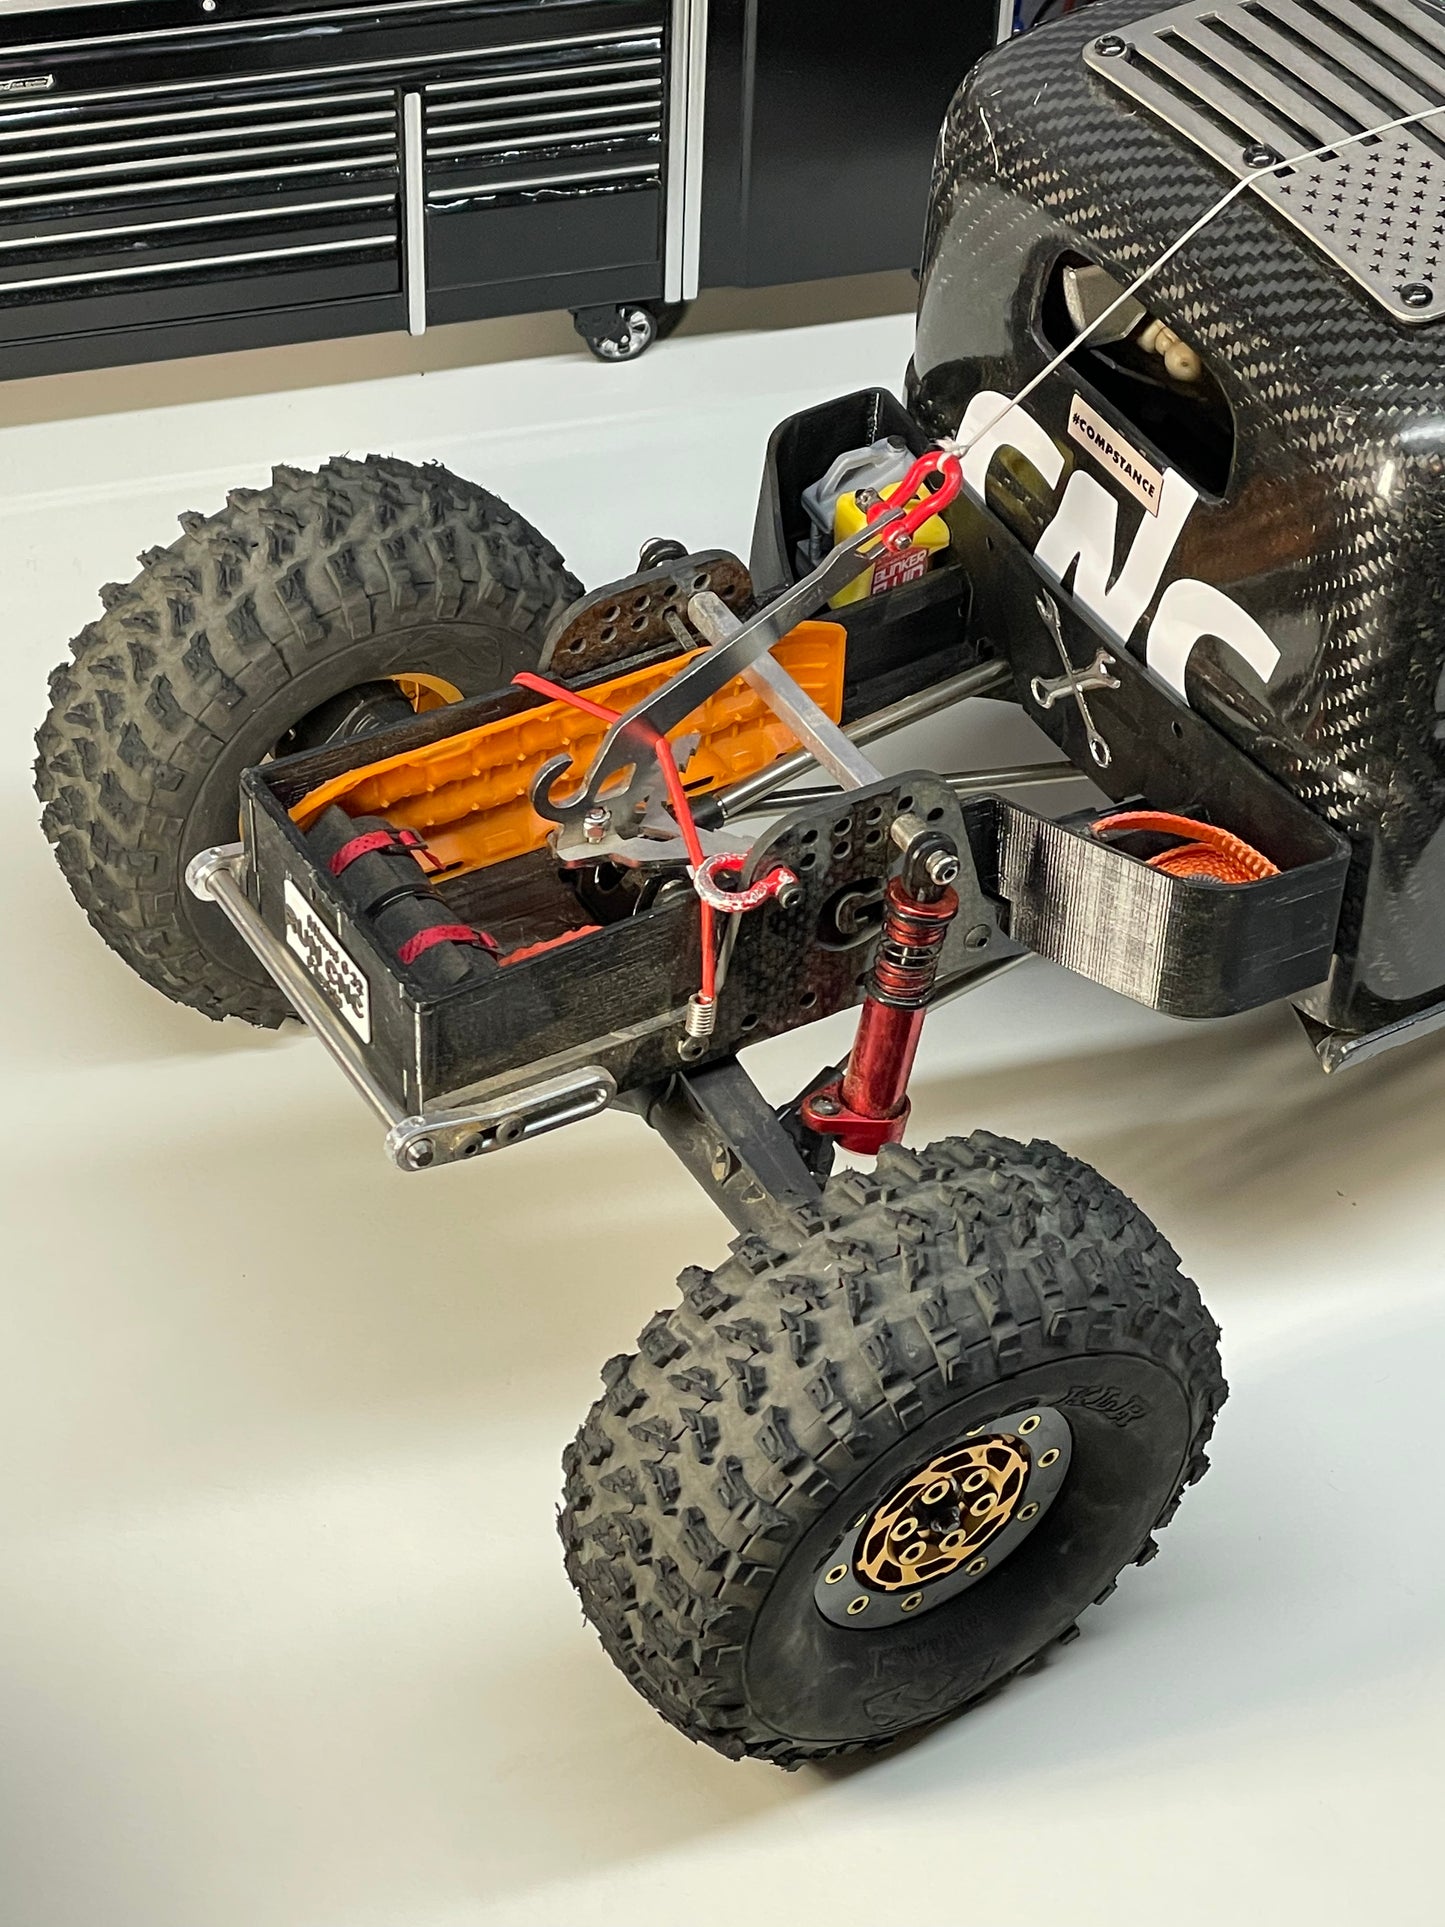 Drop Bed for the Gspeed V3 Chassis and Power Wagon Body